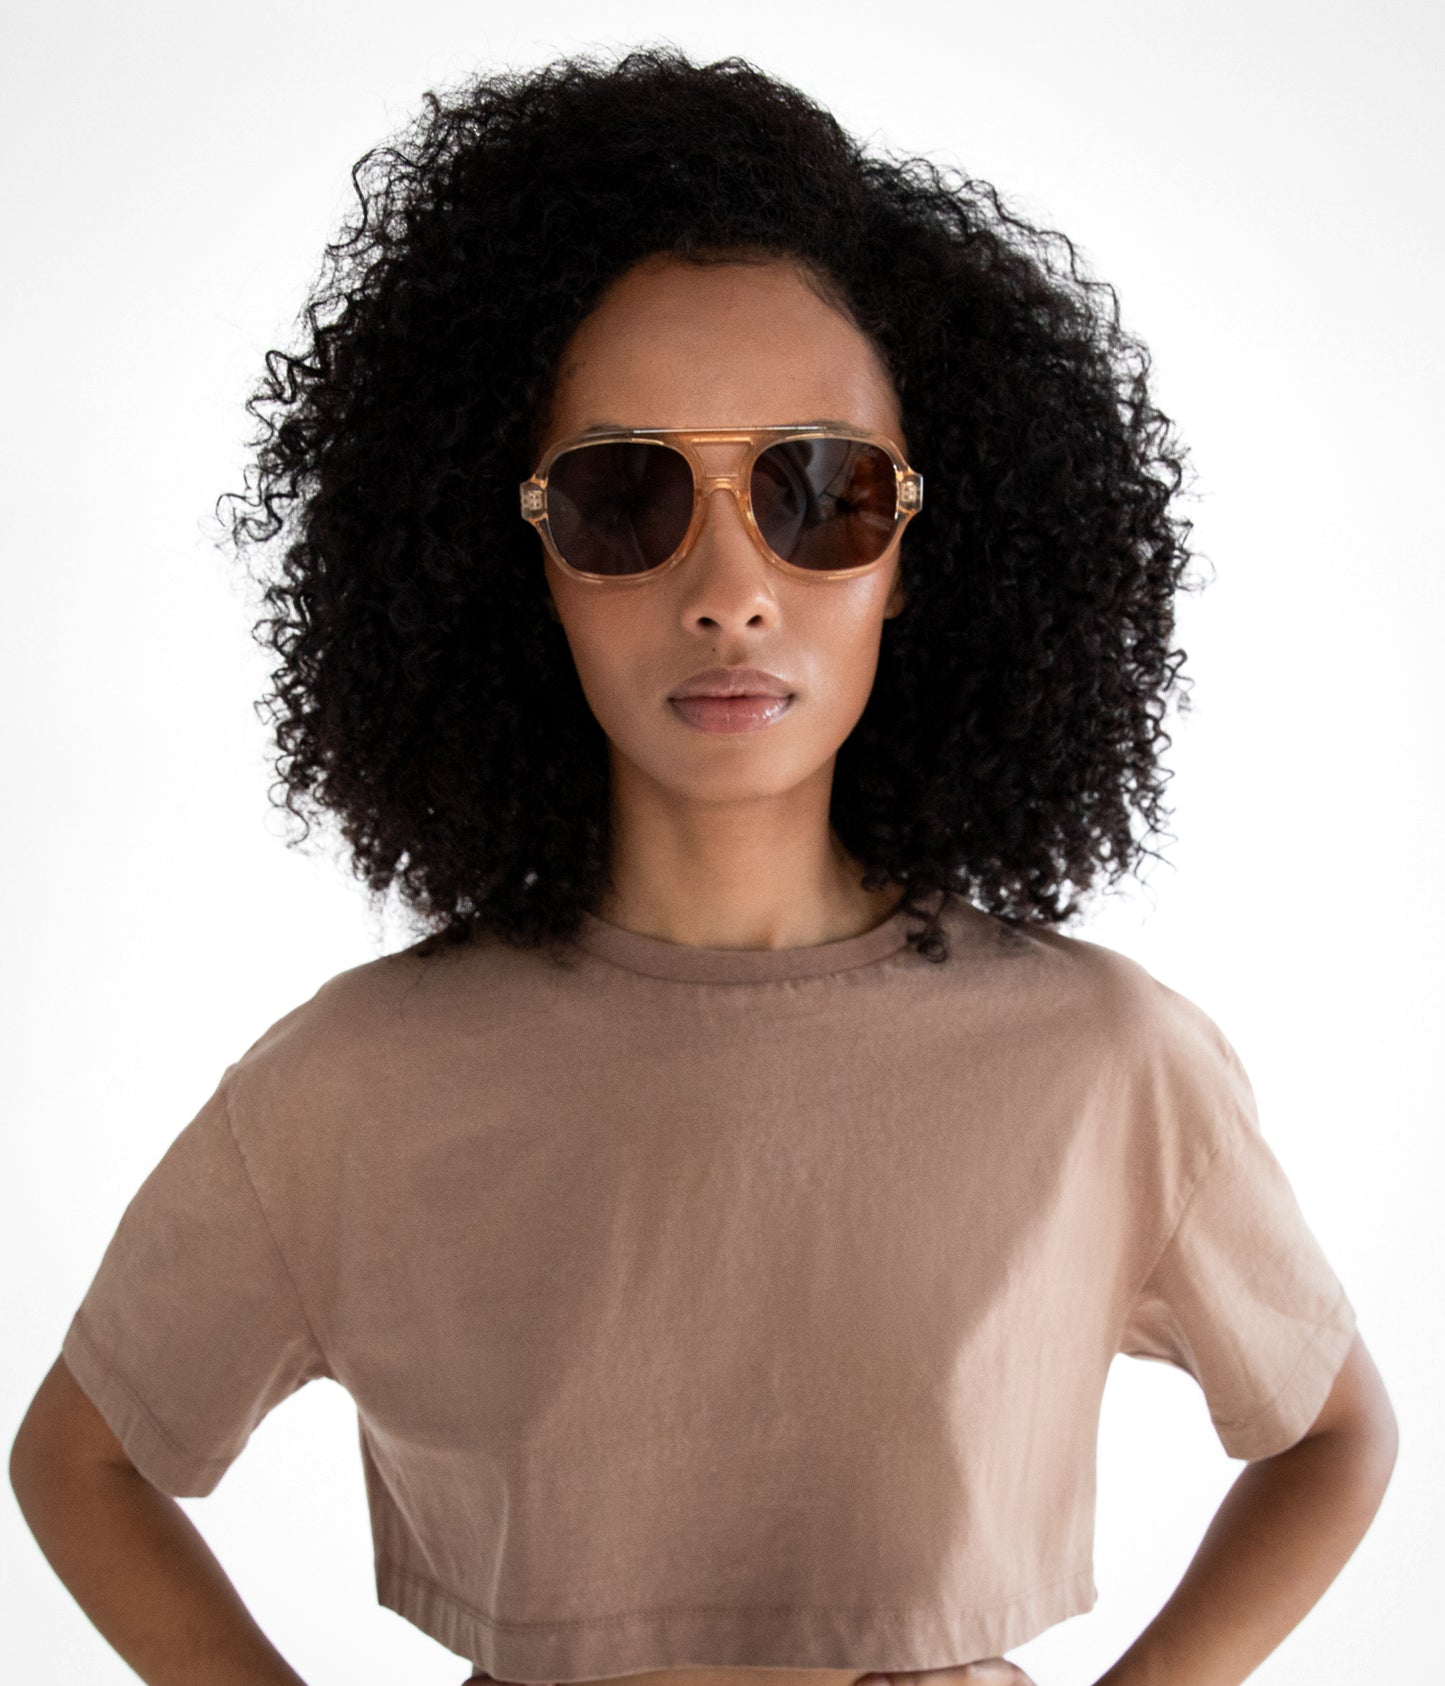 CHOI-2 Recycled Aviator Sunglasses | Color: Green, Brown - variant::green